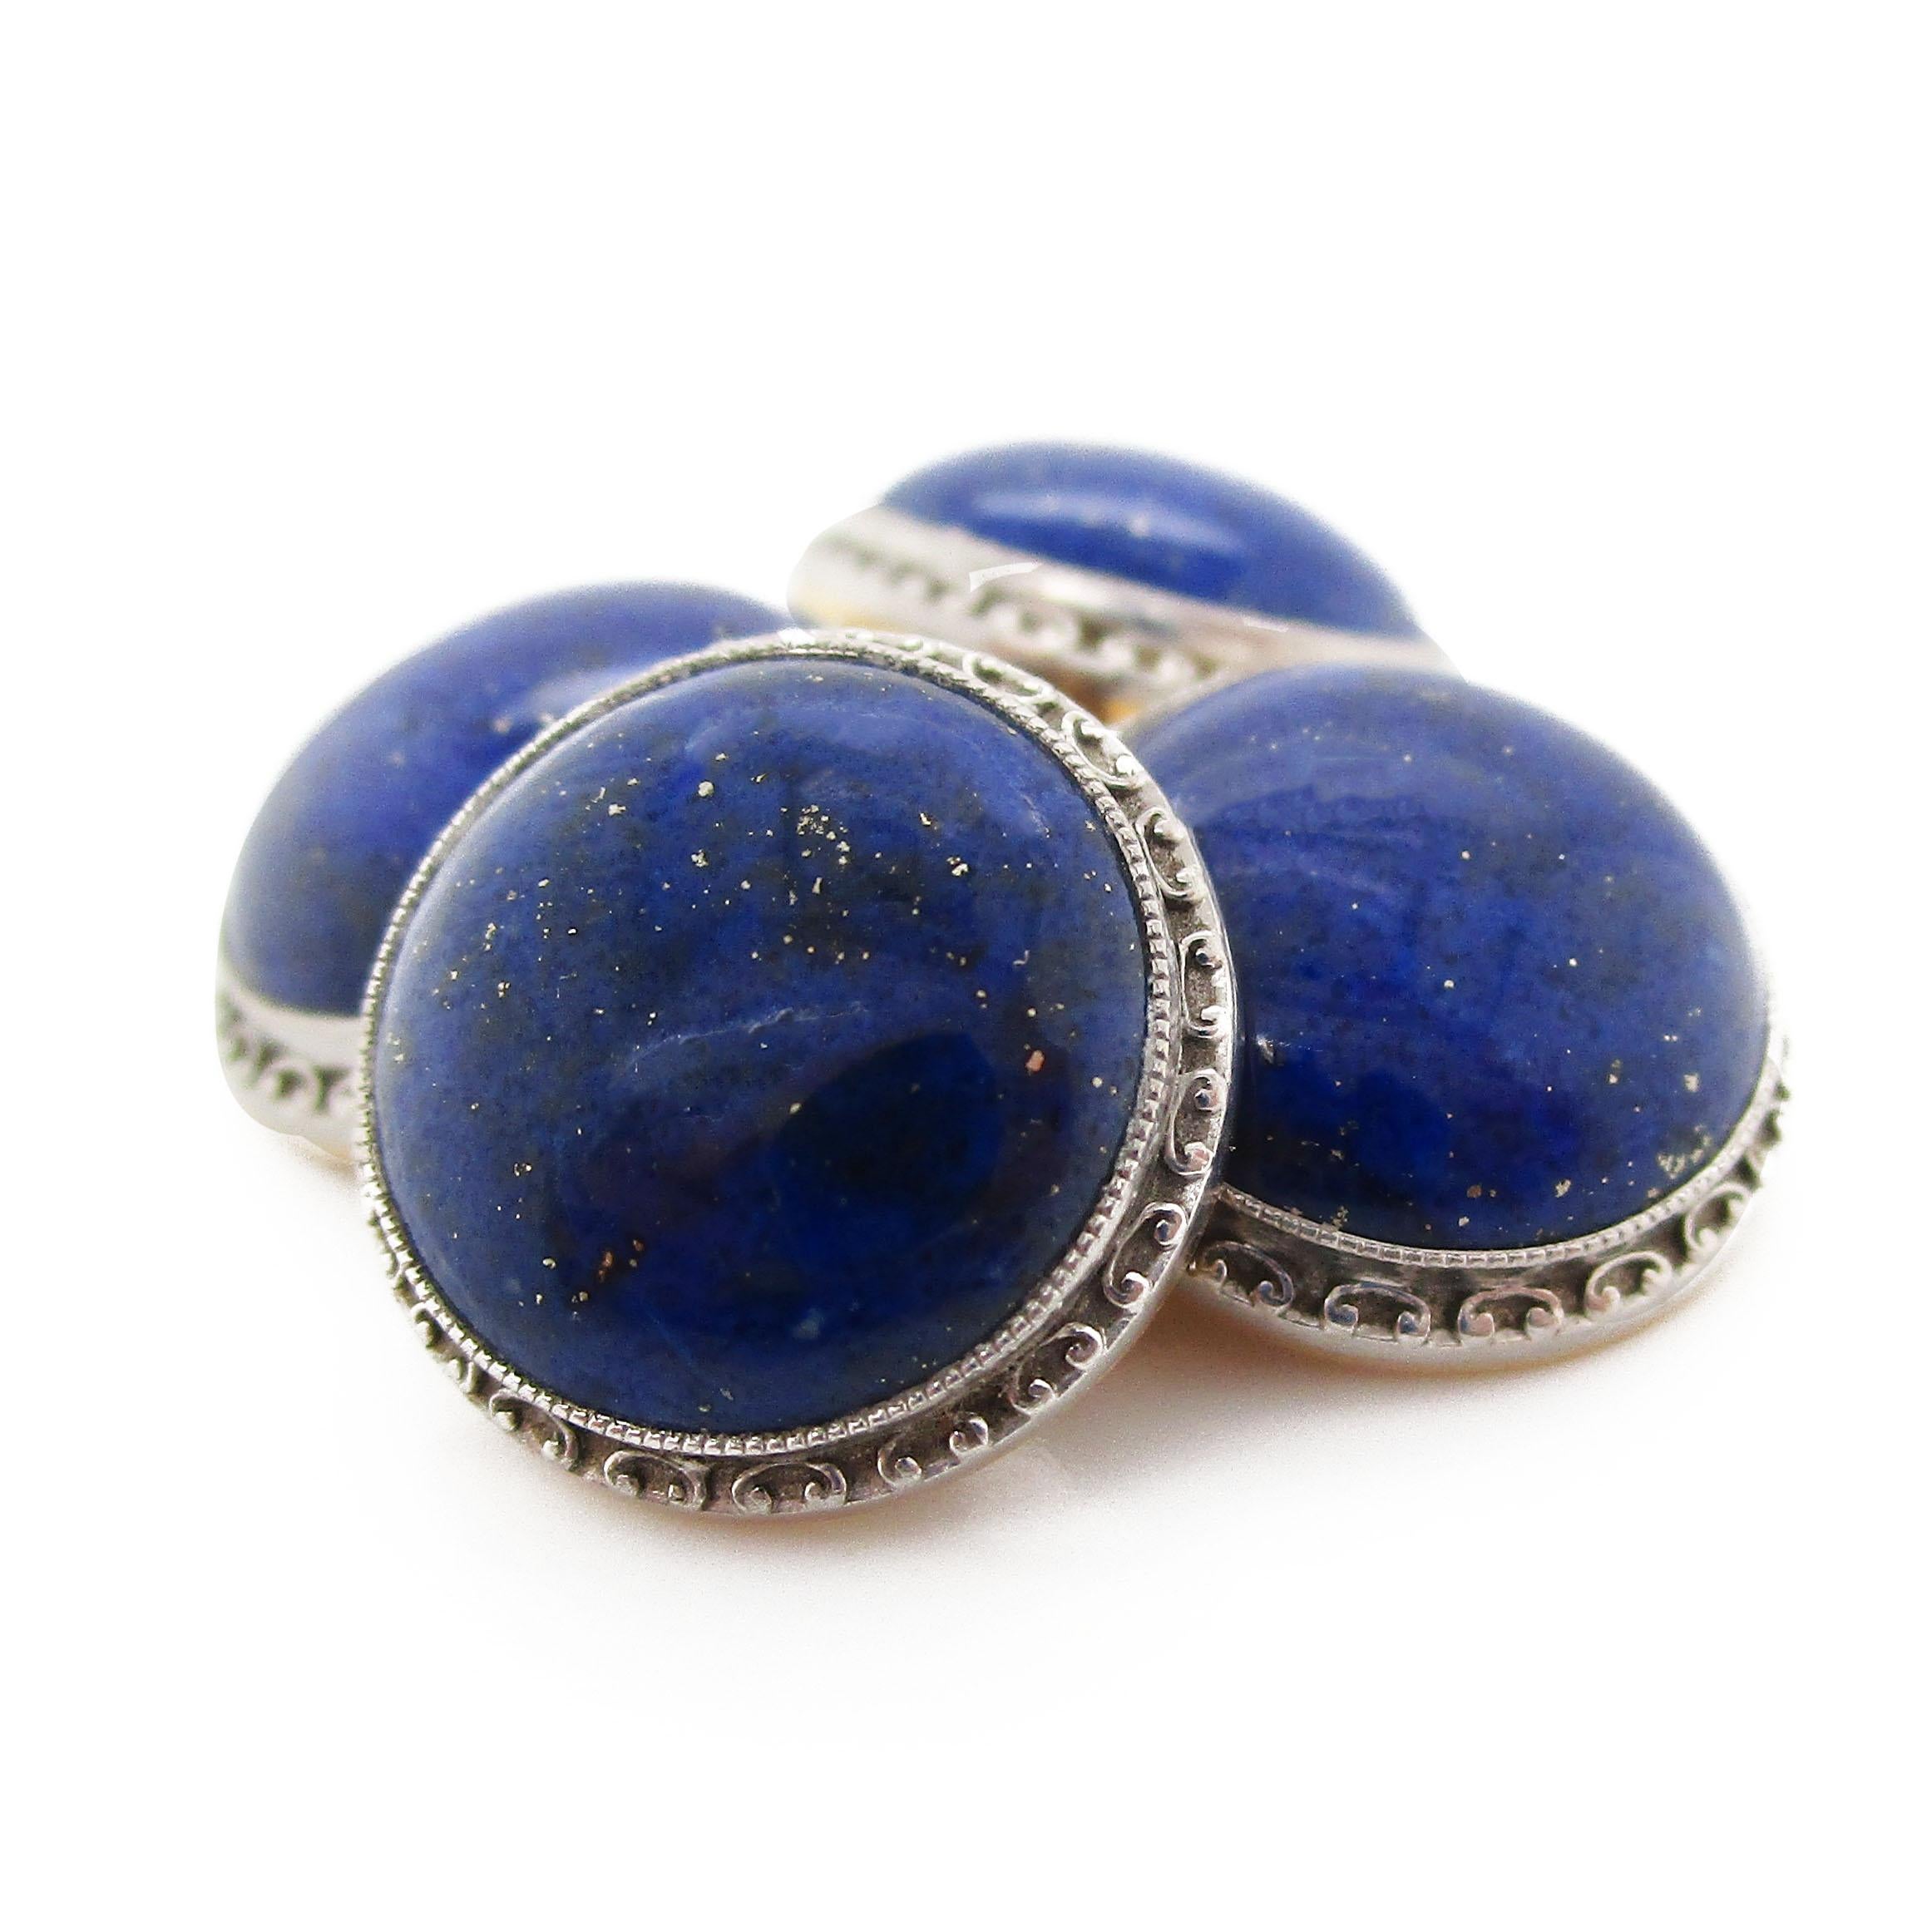 These incredible Art Deco cufflinks feature rich platinum over 14k yellow gold surrounding a stunning royal blue lapis cabochon center. The platinum over gold frame bears a fine detailing that adds a subtle touch to already magnificent cufflinks.